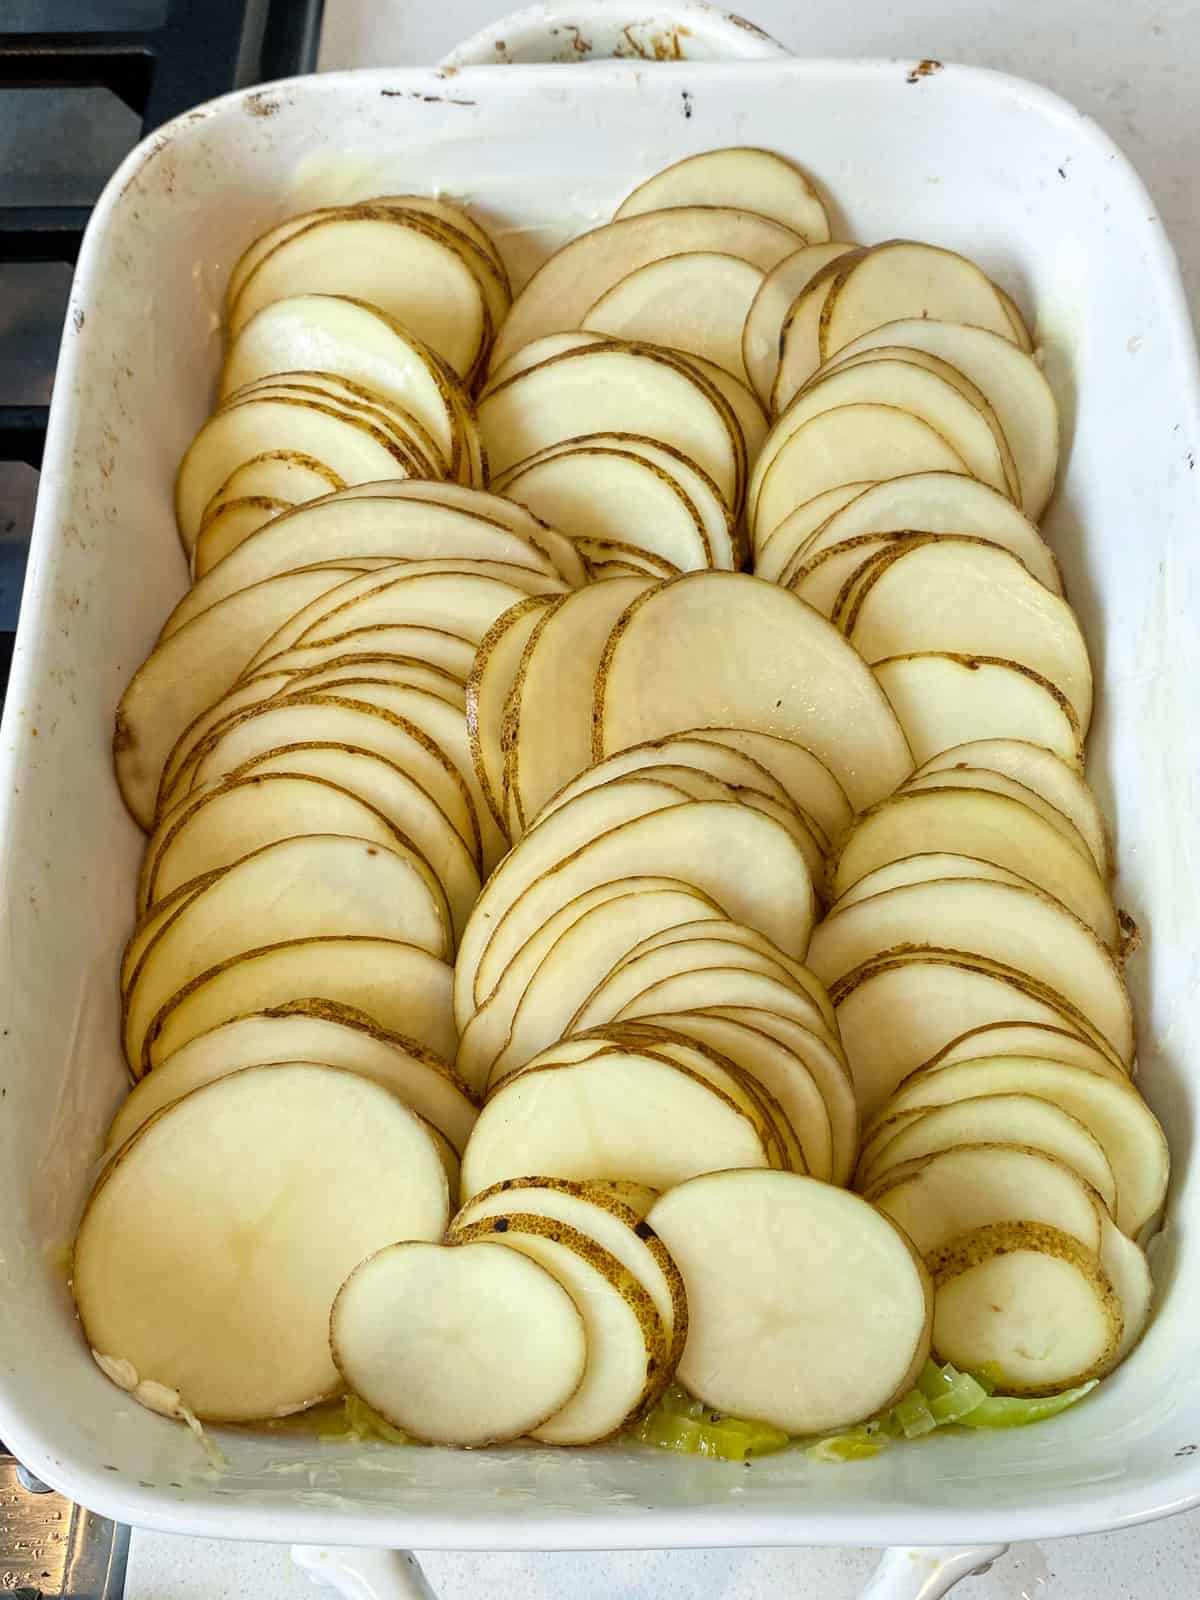 Layer the thinly sliced potatoes on top of the sautted leeks in the baking dish.